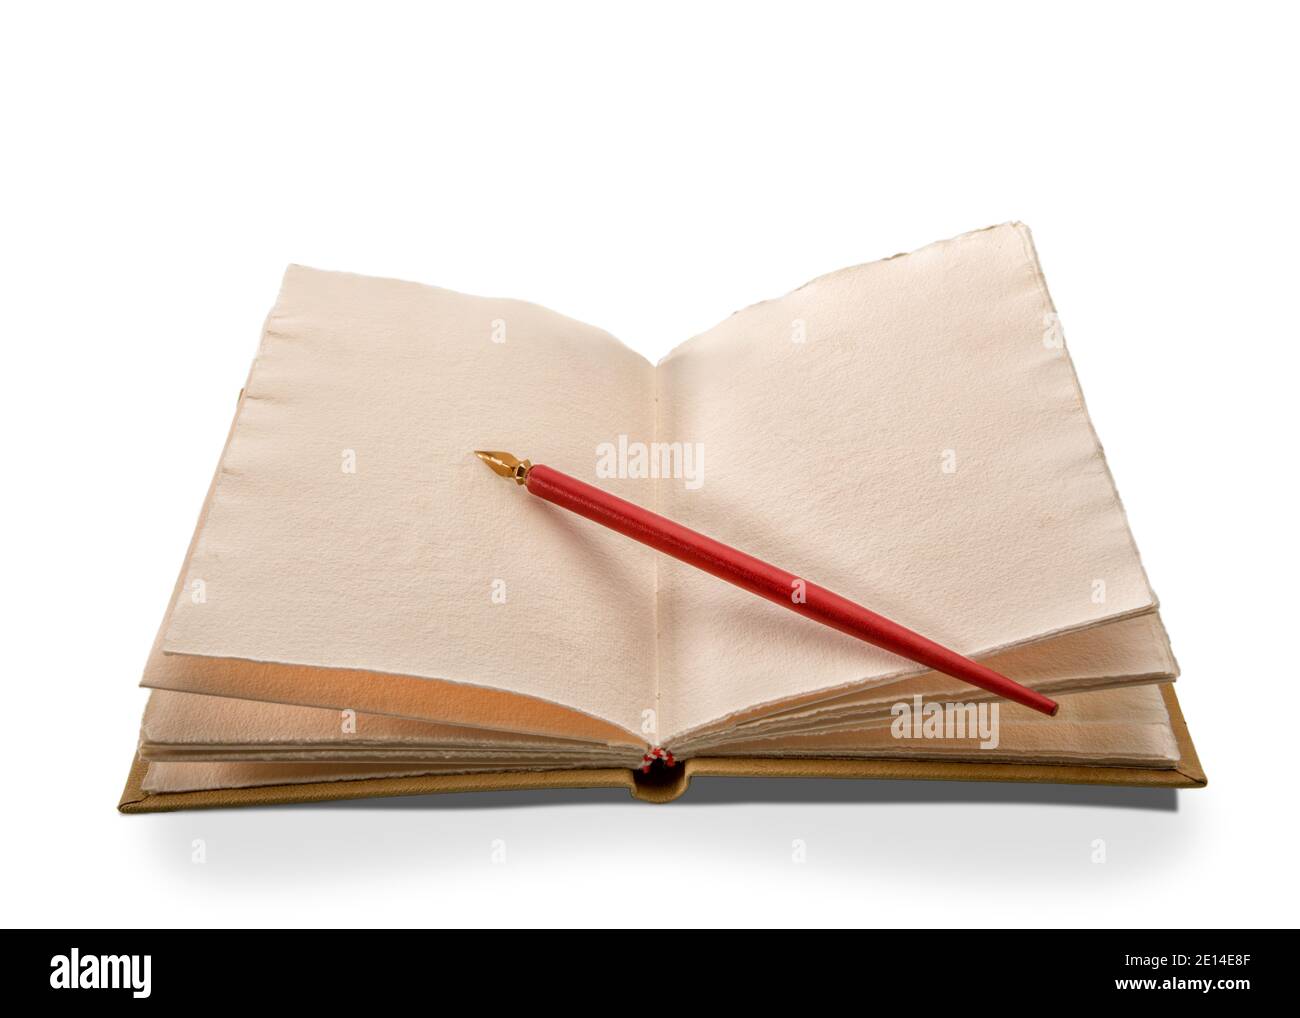 vintage red pen with gold nib on antique leather hardcover notebook isolated on white background Stock Photo